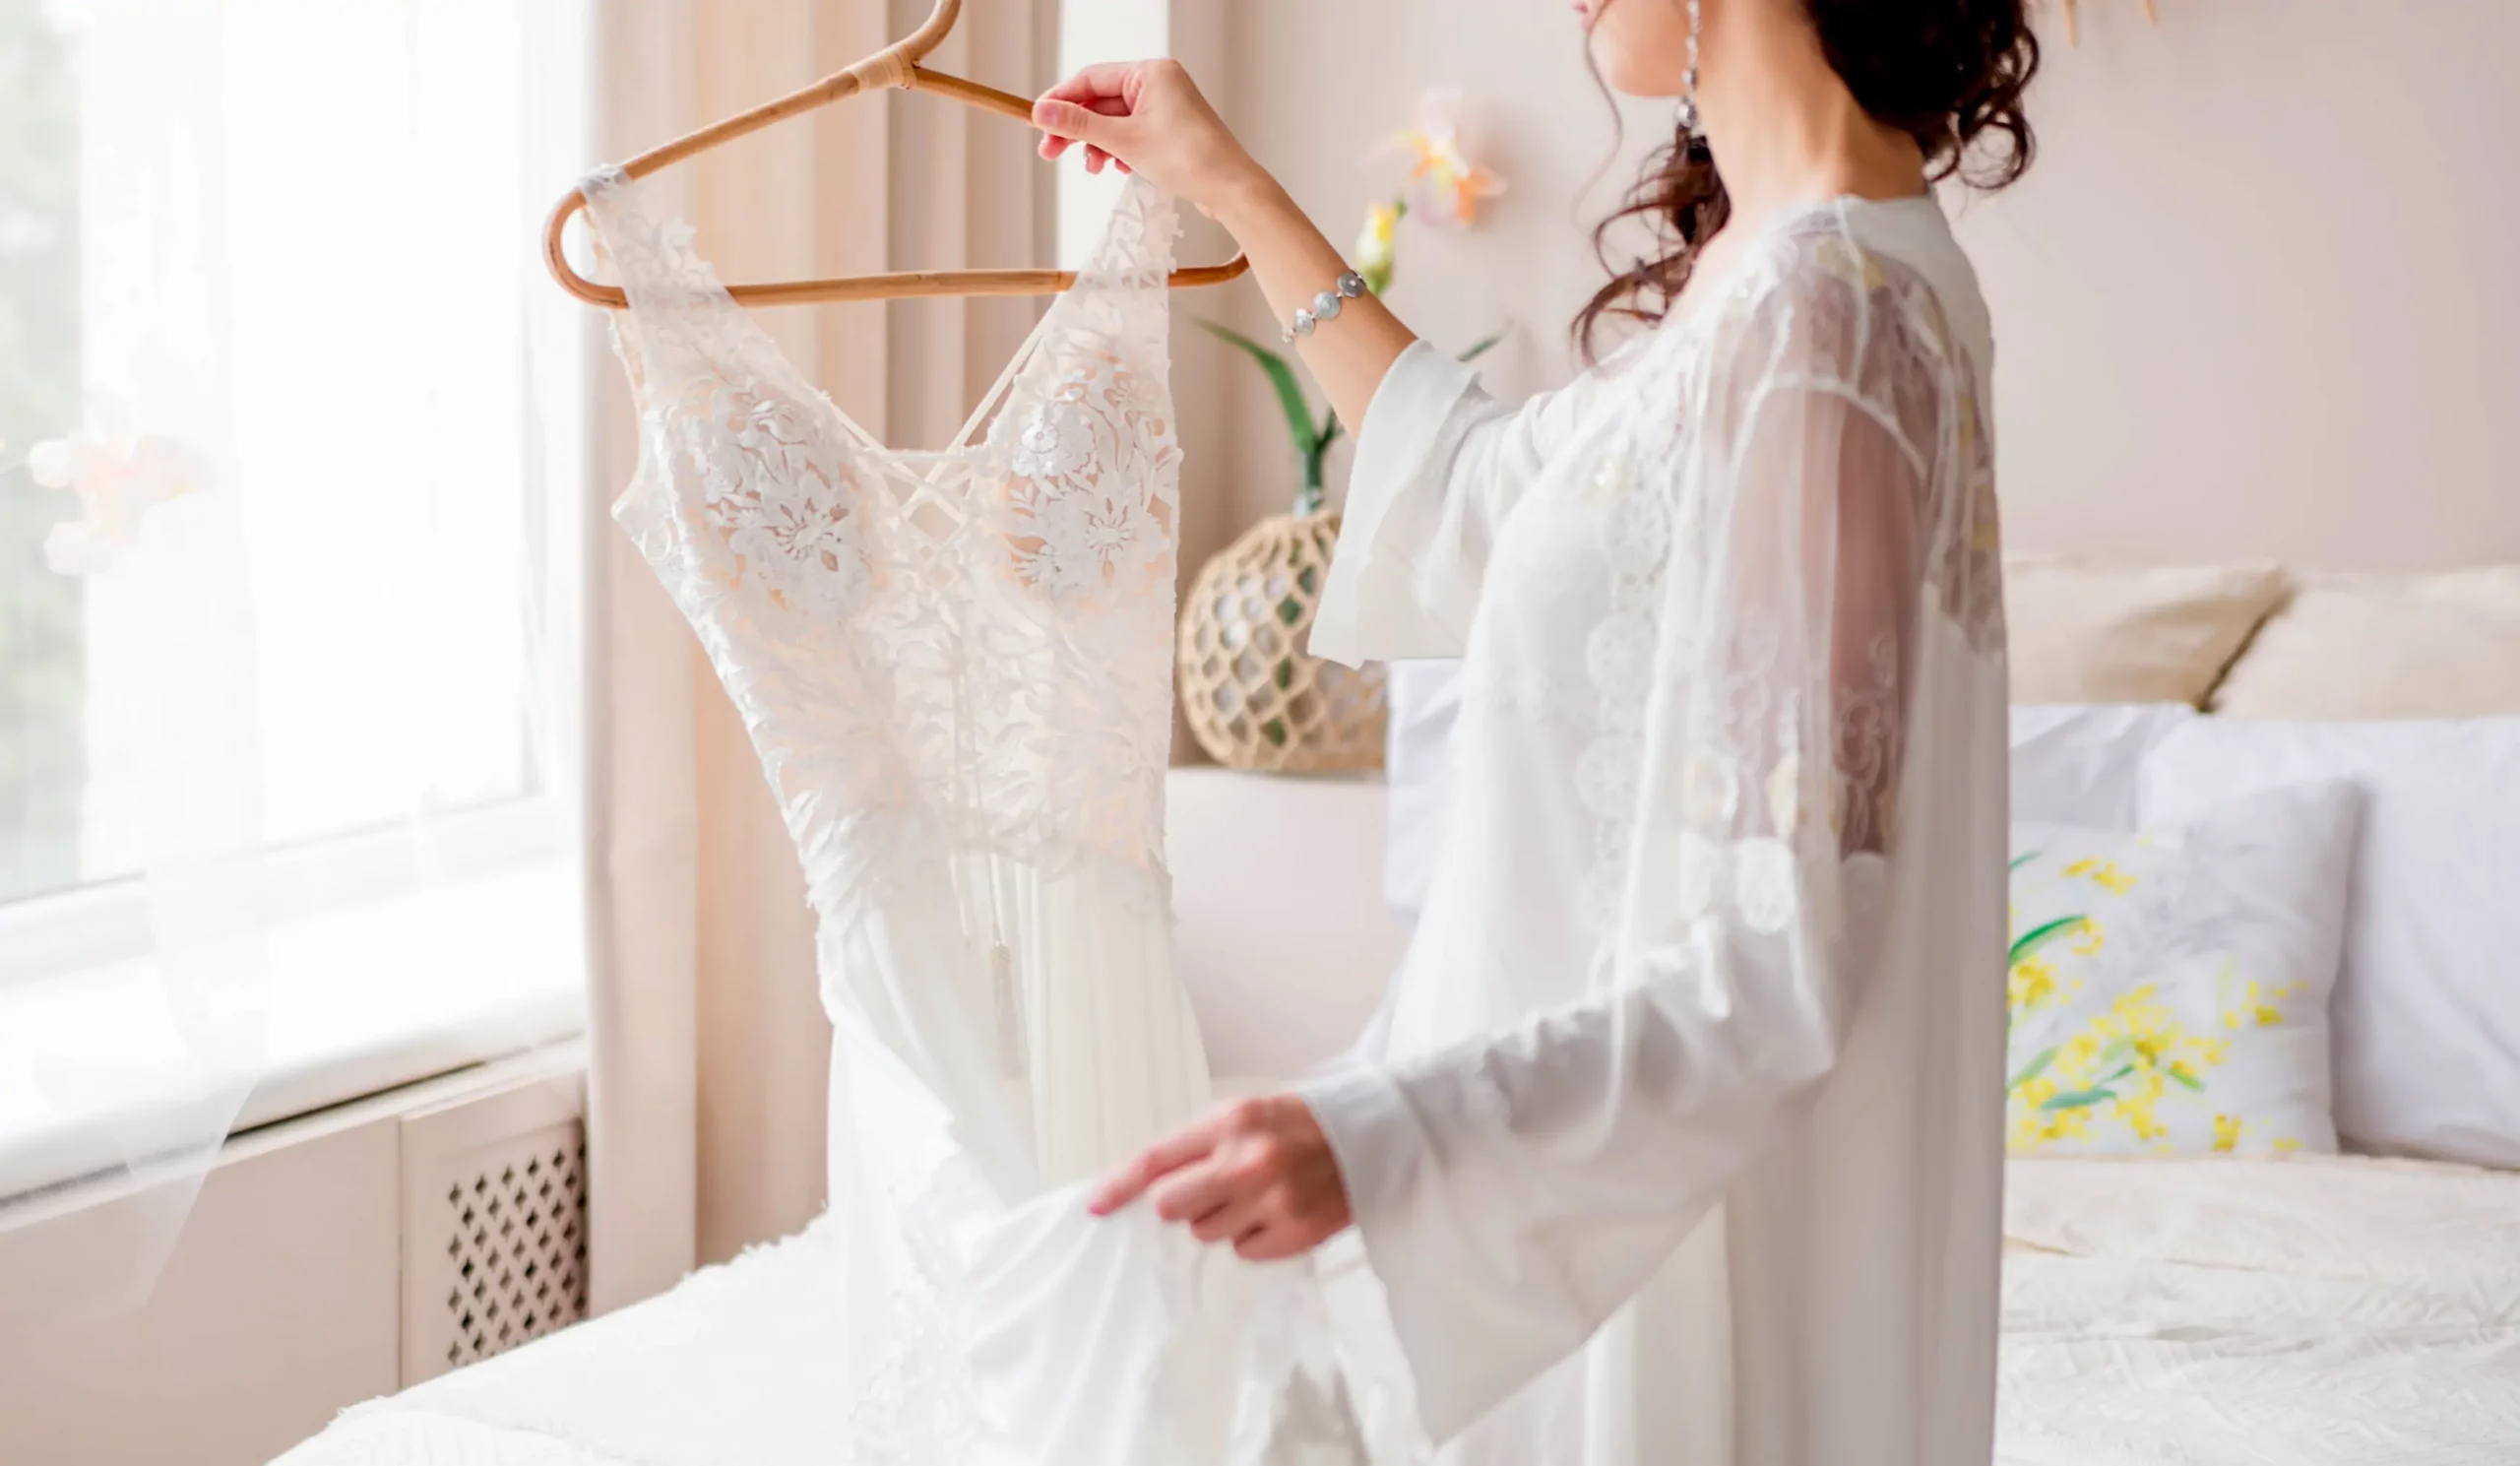 bride-white-peignoir-stands-near-bed-holds-wedding-dress-her-hands-horizontal-photo